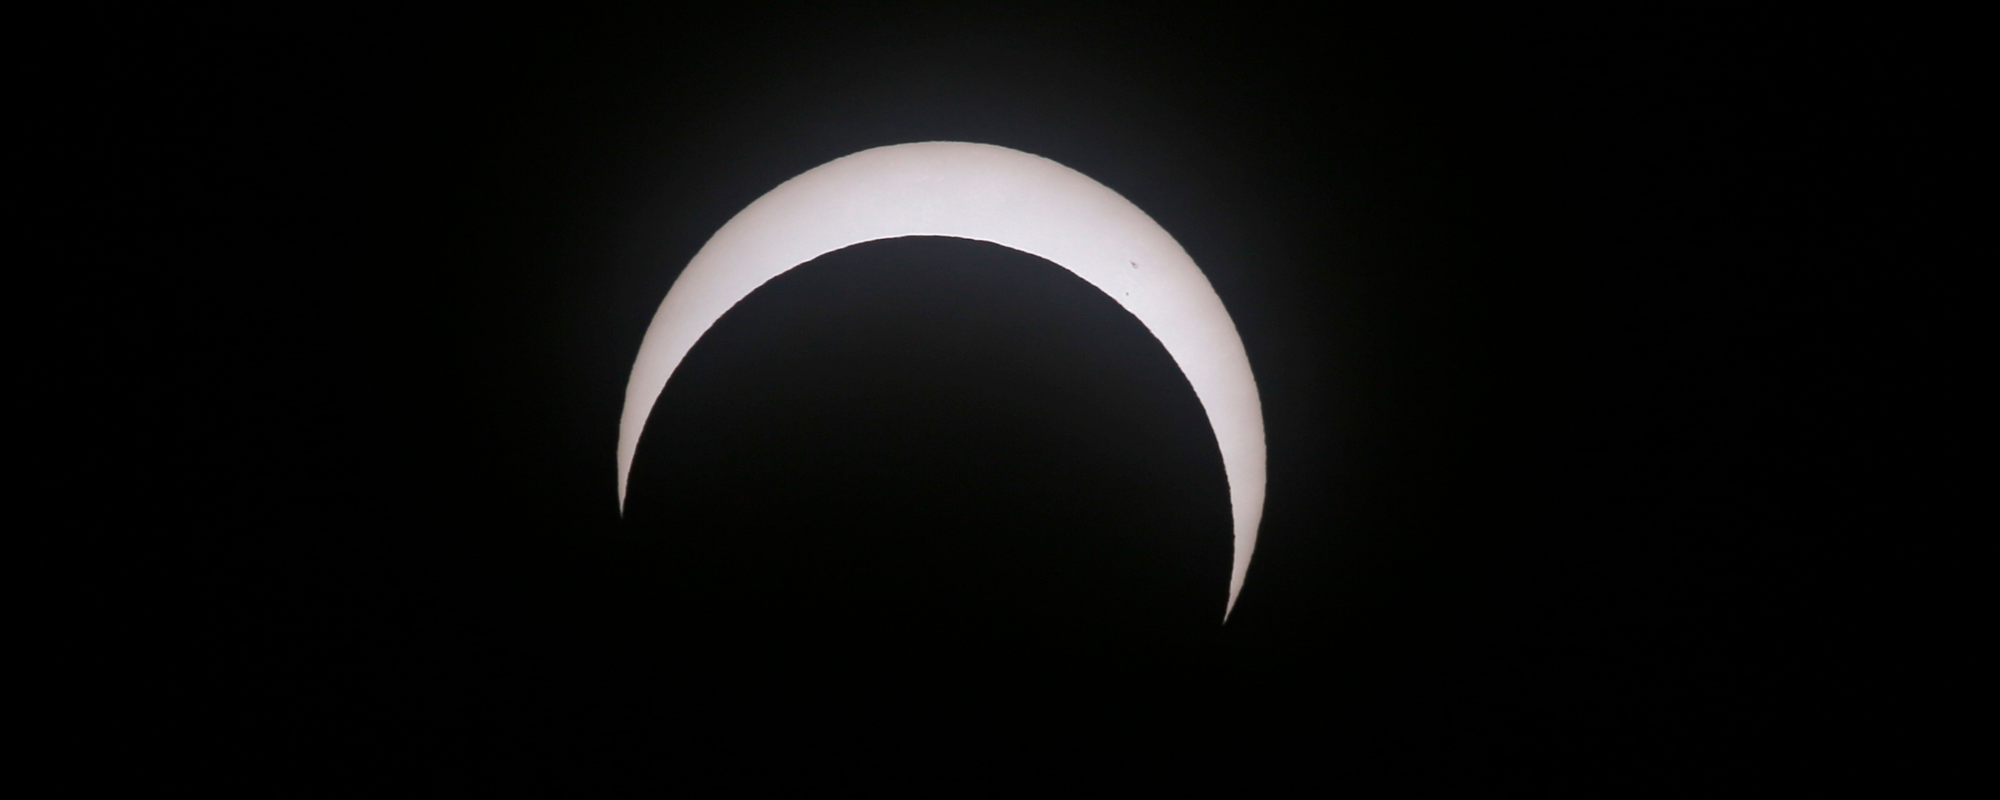 5 Songs to Add To Your Solar Eclipse Viewing Playlist